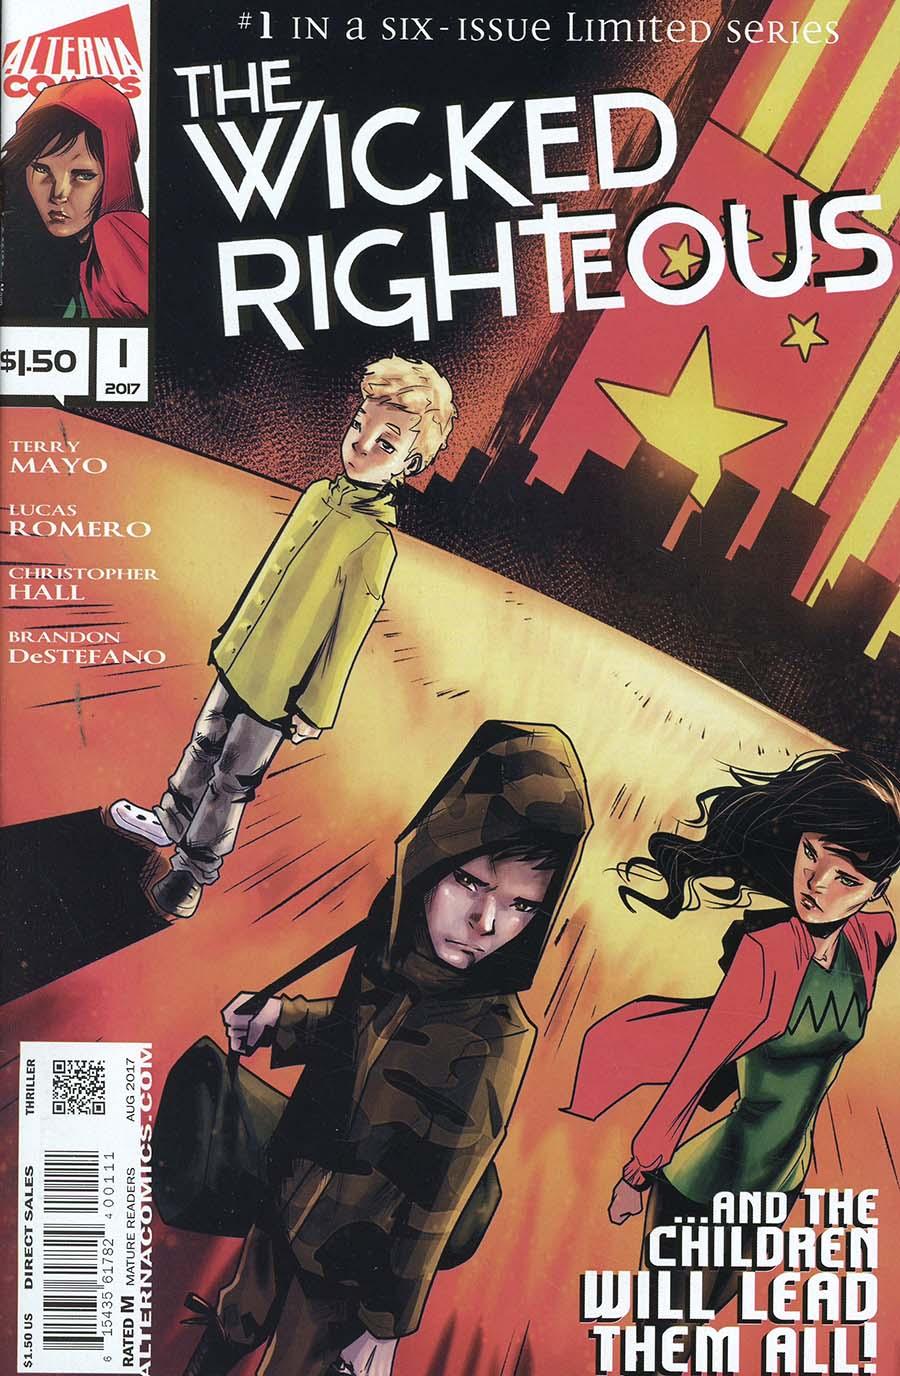 Wicked Righteous Vol. 1 #1